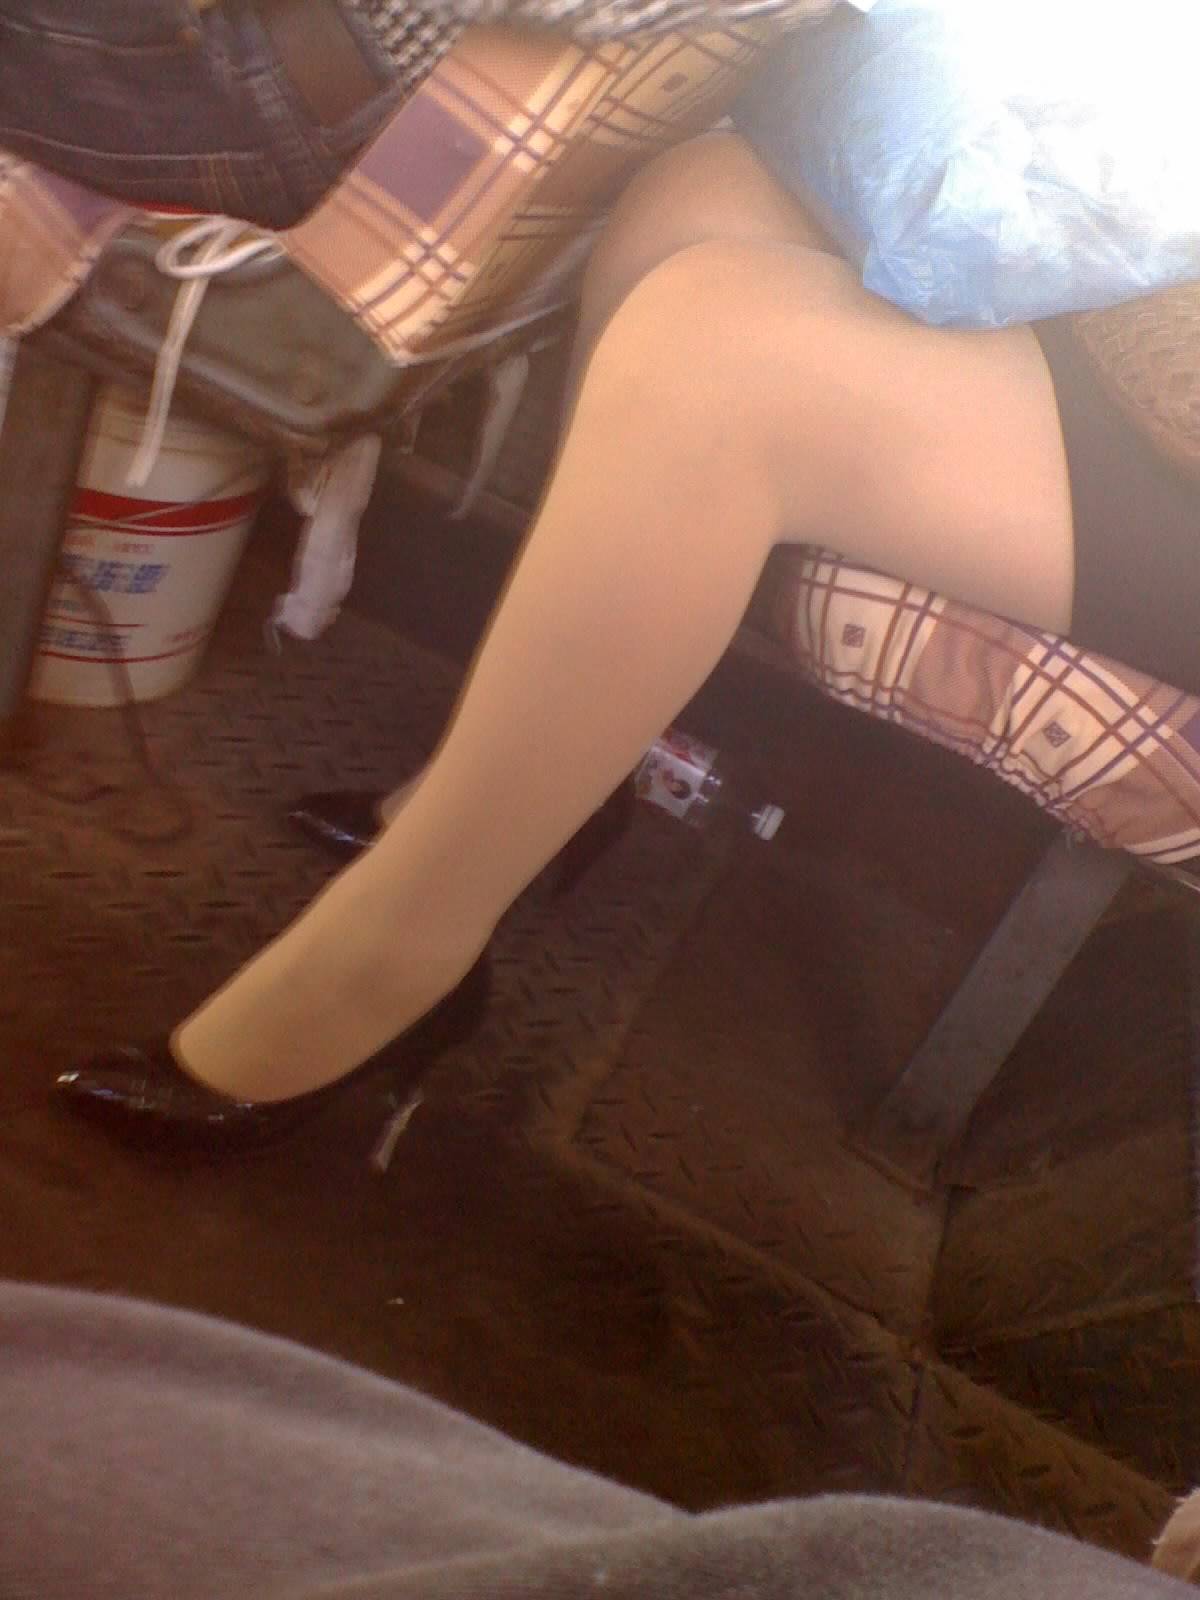 [outdoor Street Photo] on August 5, 2013, sneak photos of silk stockings, legs and black heels on the bus